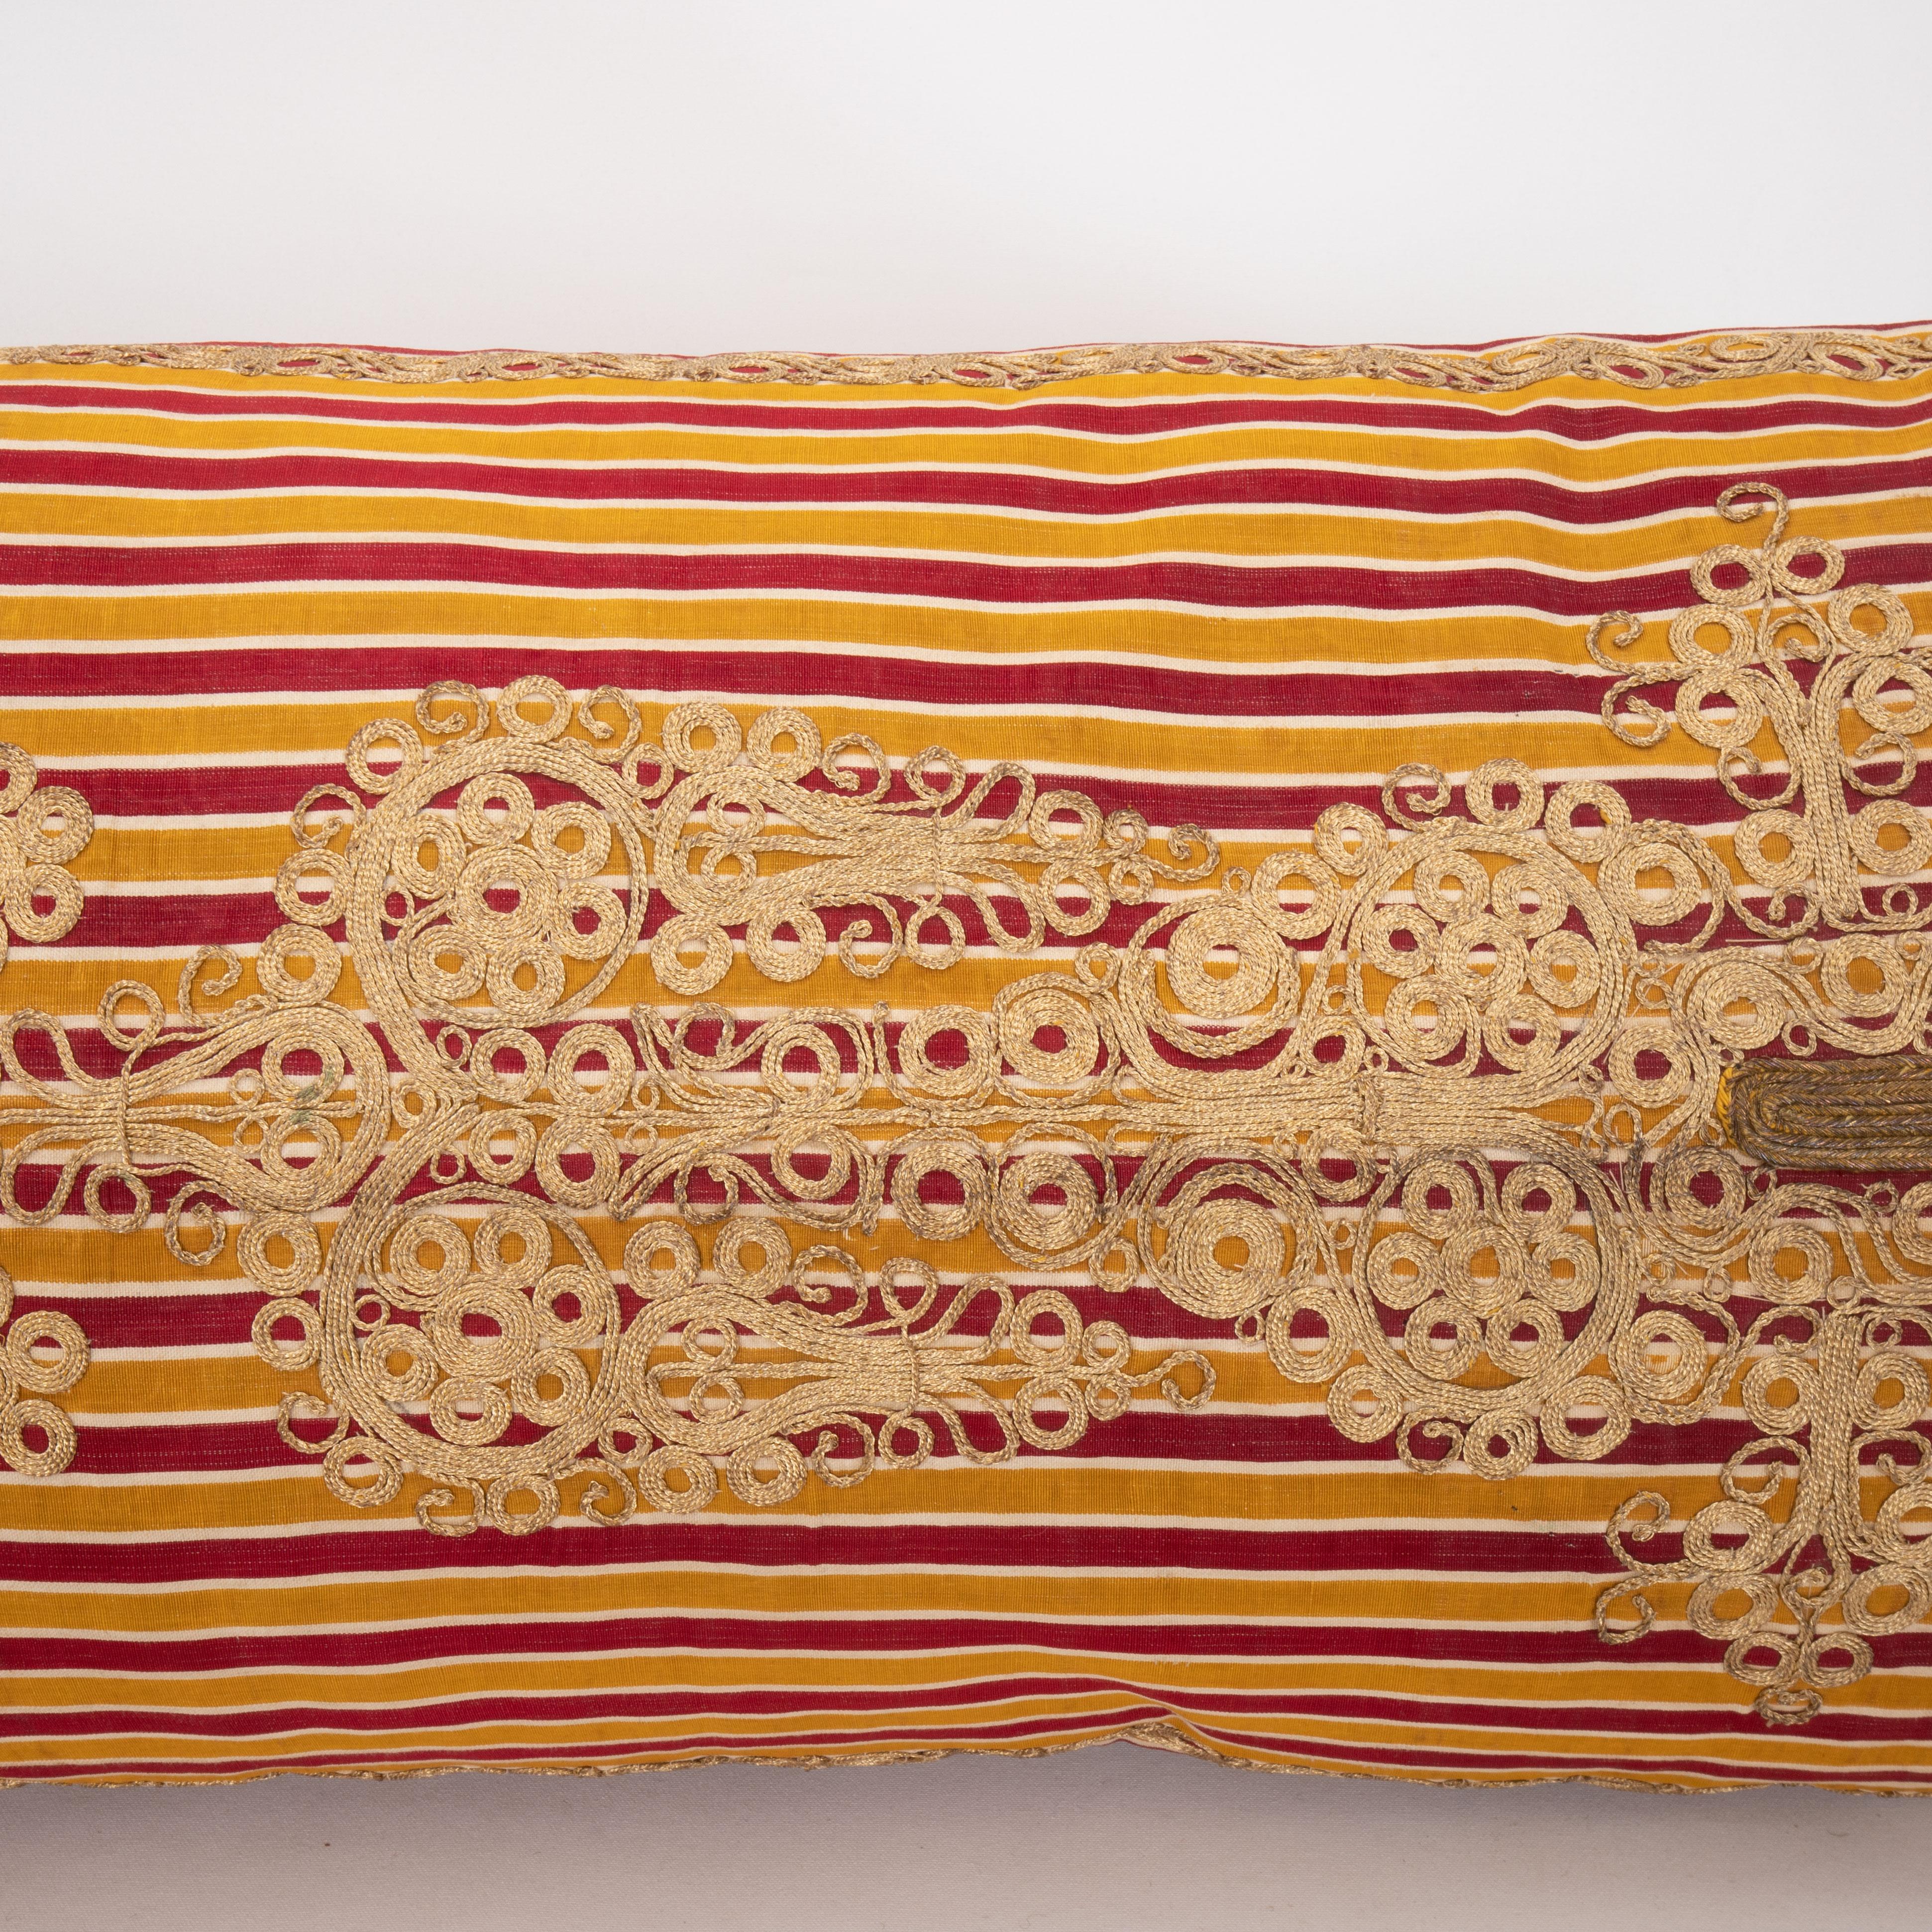 Embroidered Antique Ottoman Turkish Pillow Case, Early 20th C.